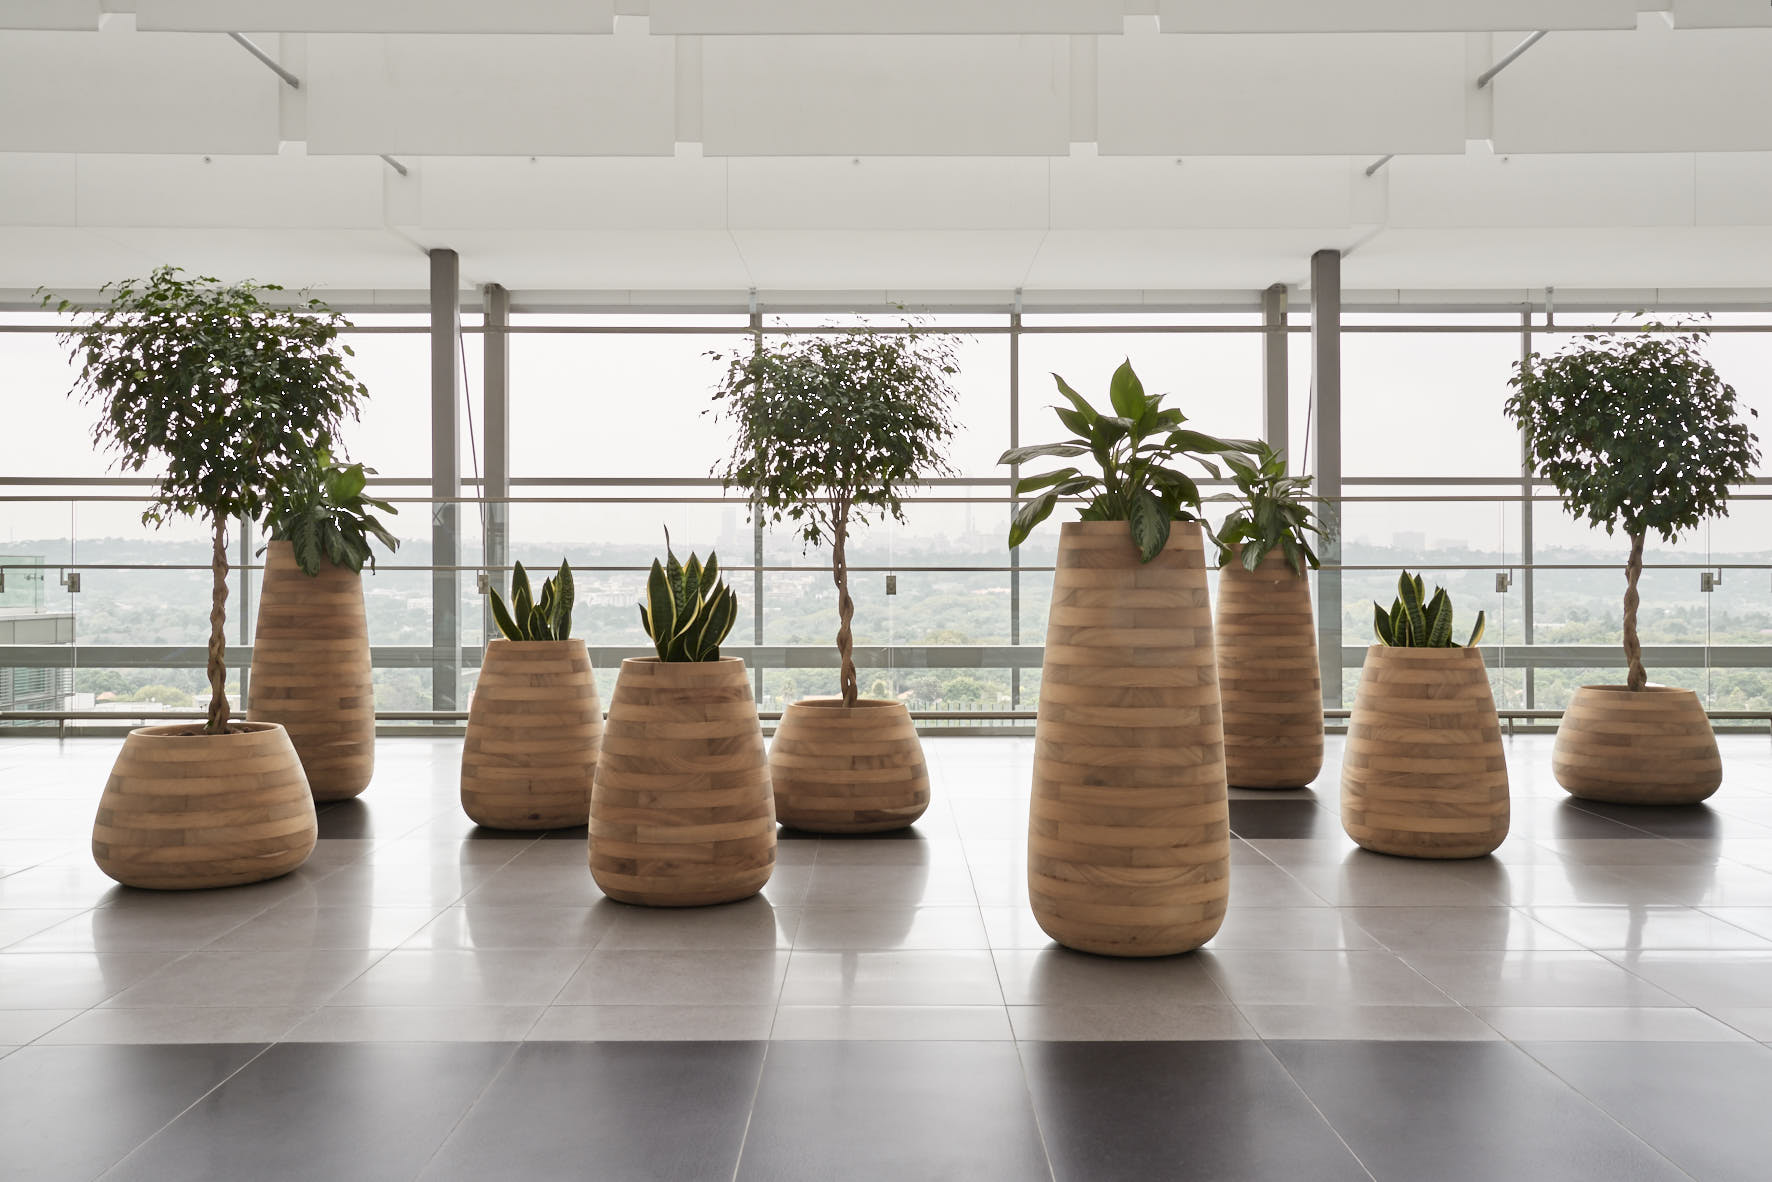 Sources Unlimited Unveils the Tuber Collection of Planters by Indigenus